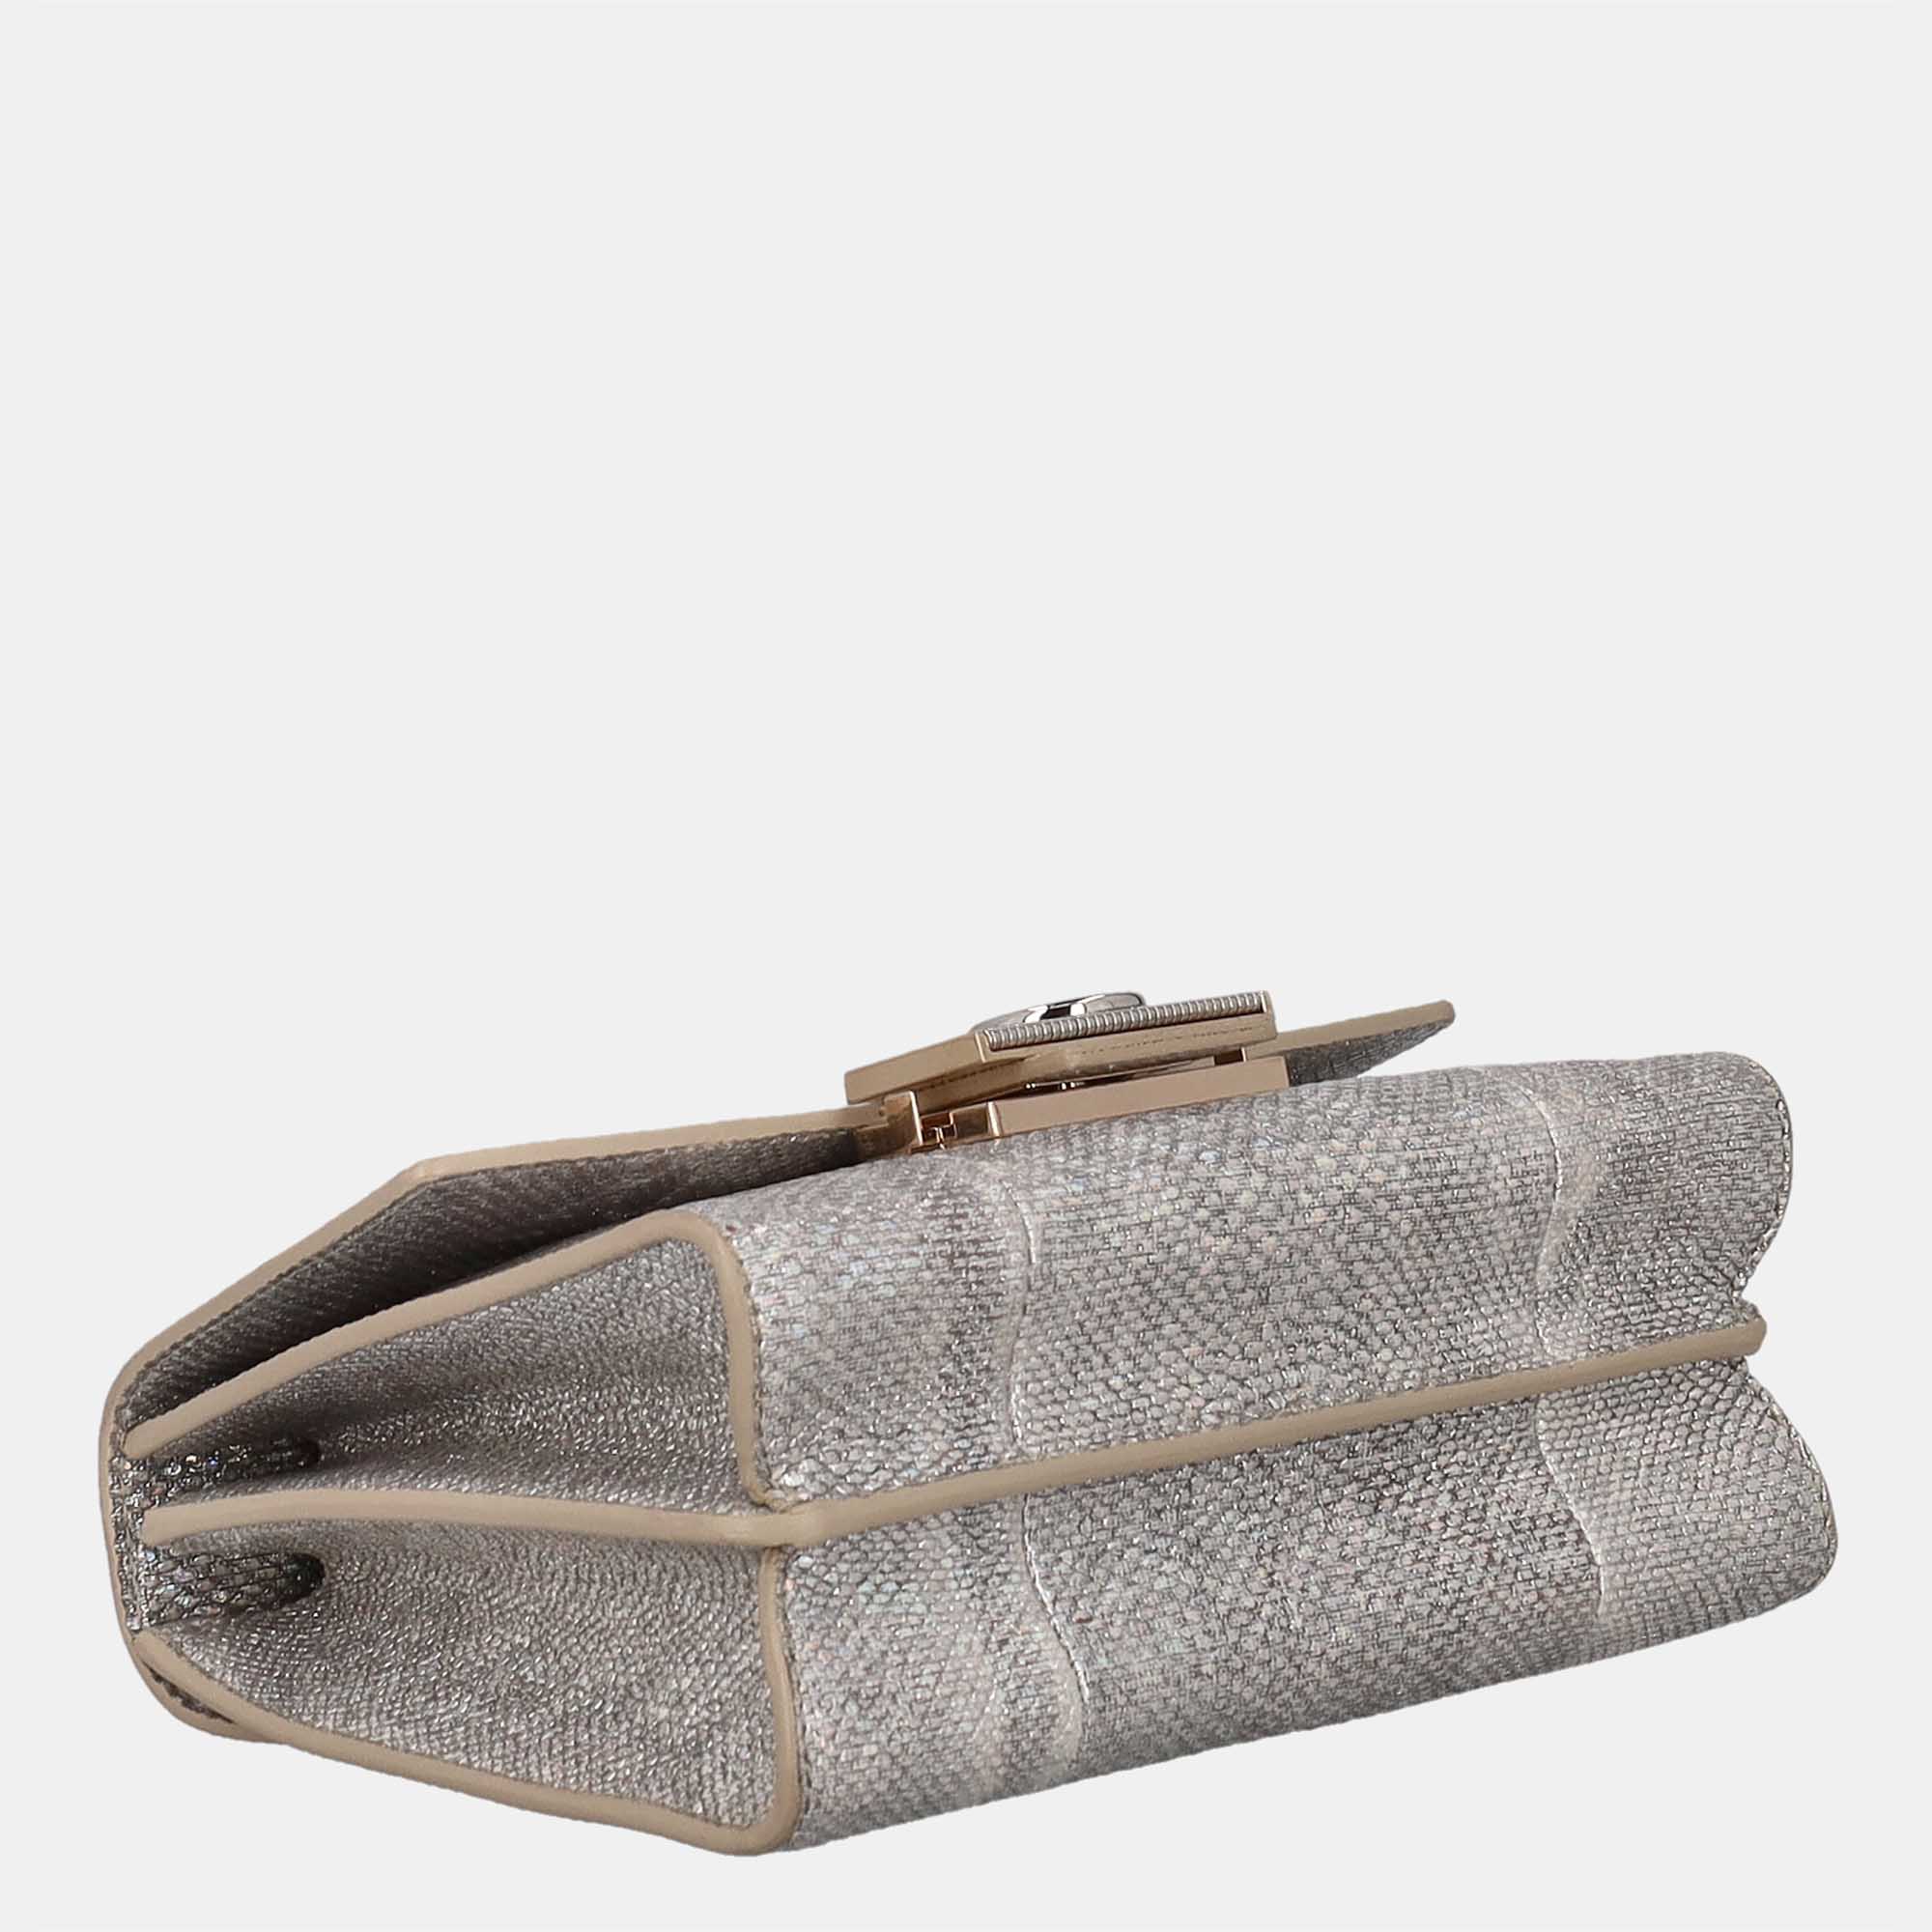 Bvlgari  Women's Leather Clutch Bag - Silver - One Size